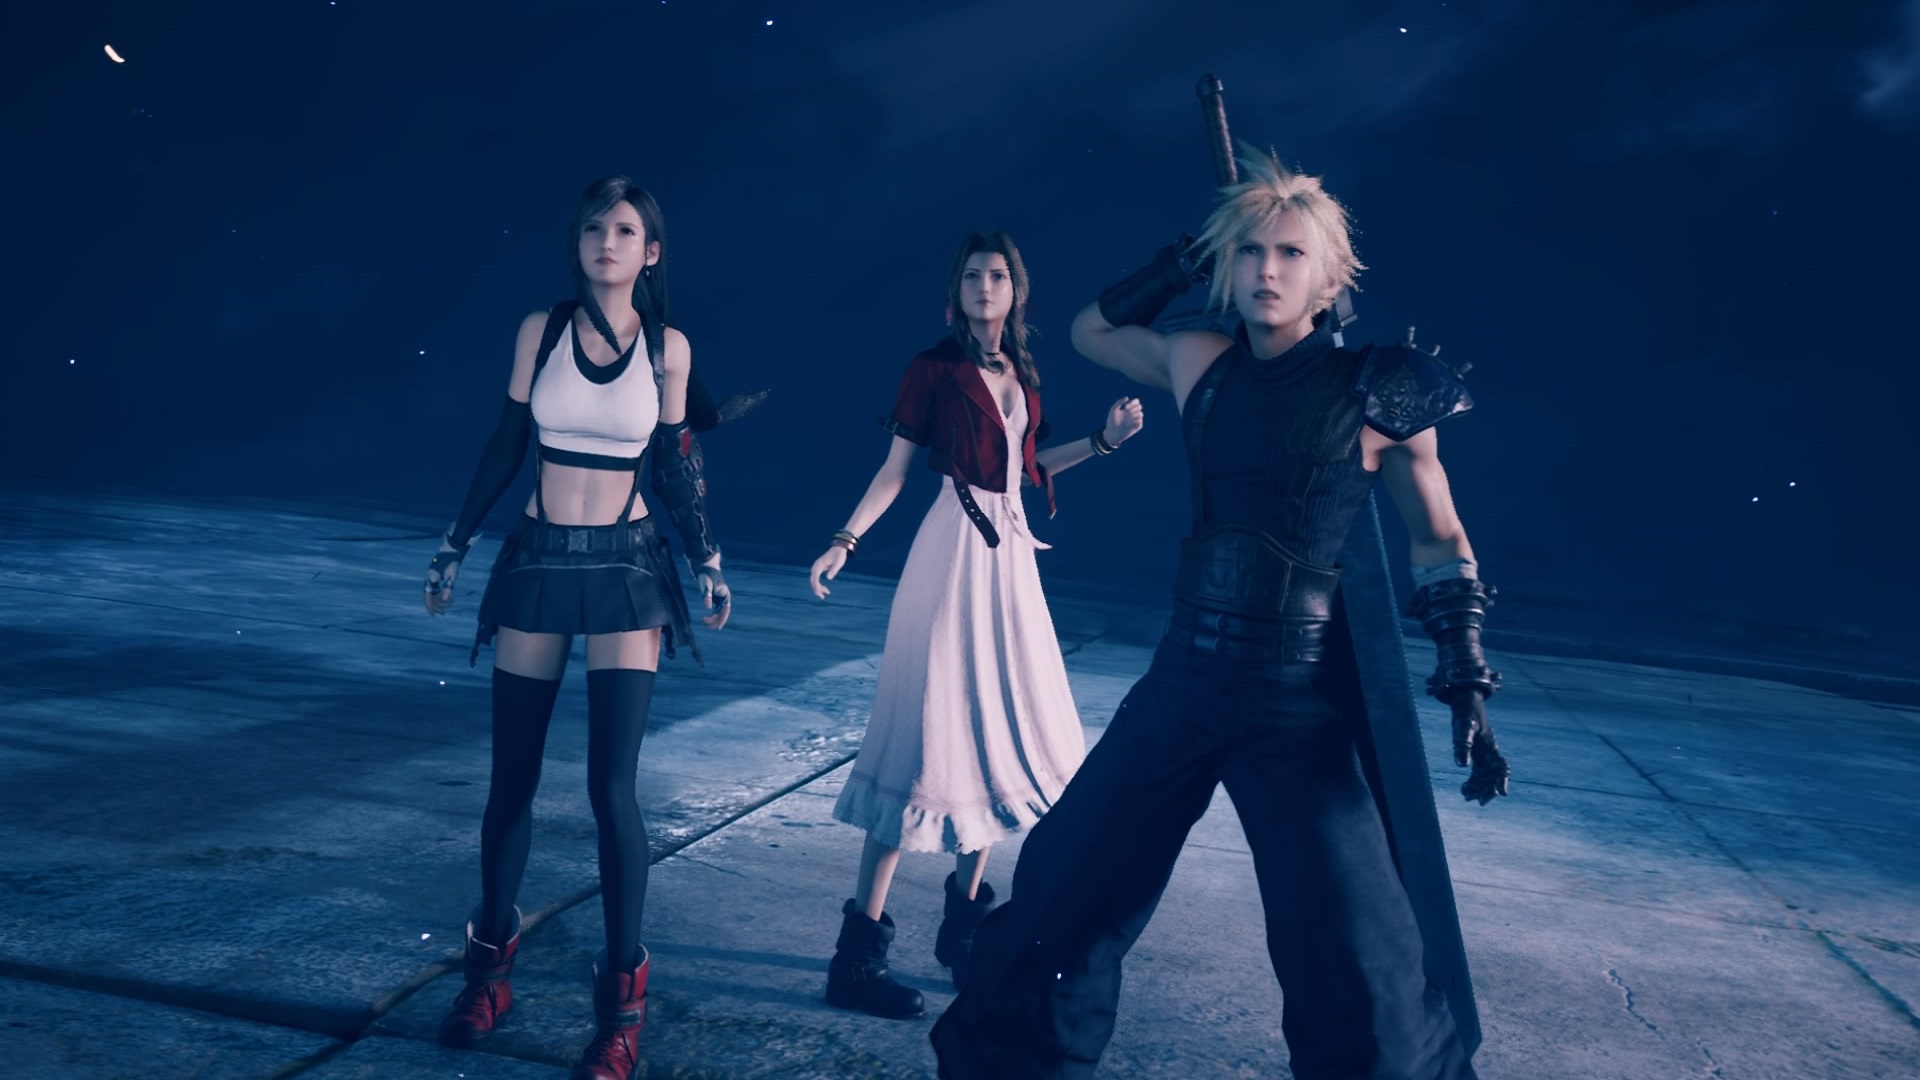 Final Fantasy 7 Remake reportedly coming to PS5 and PC with new story content